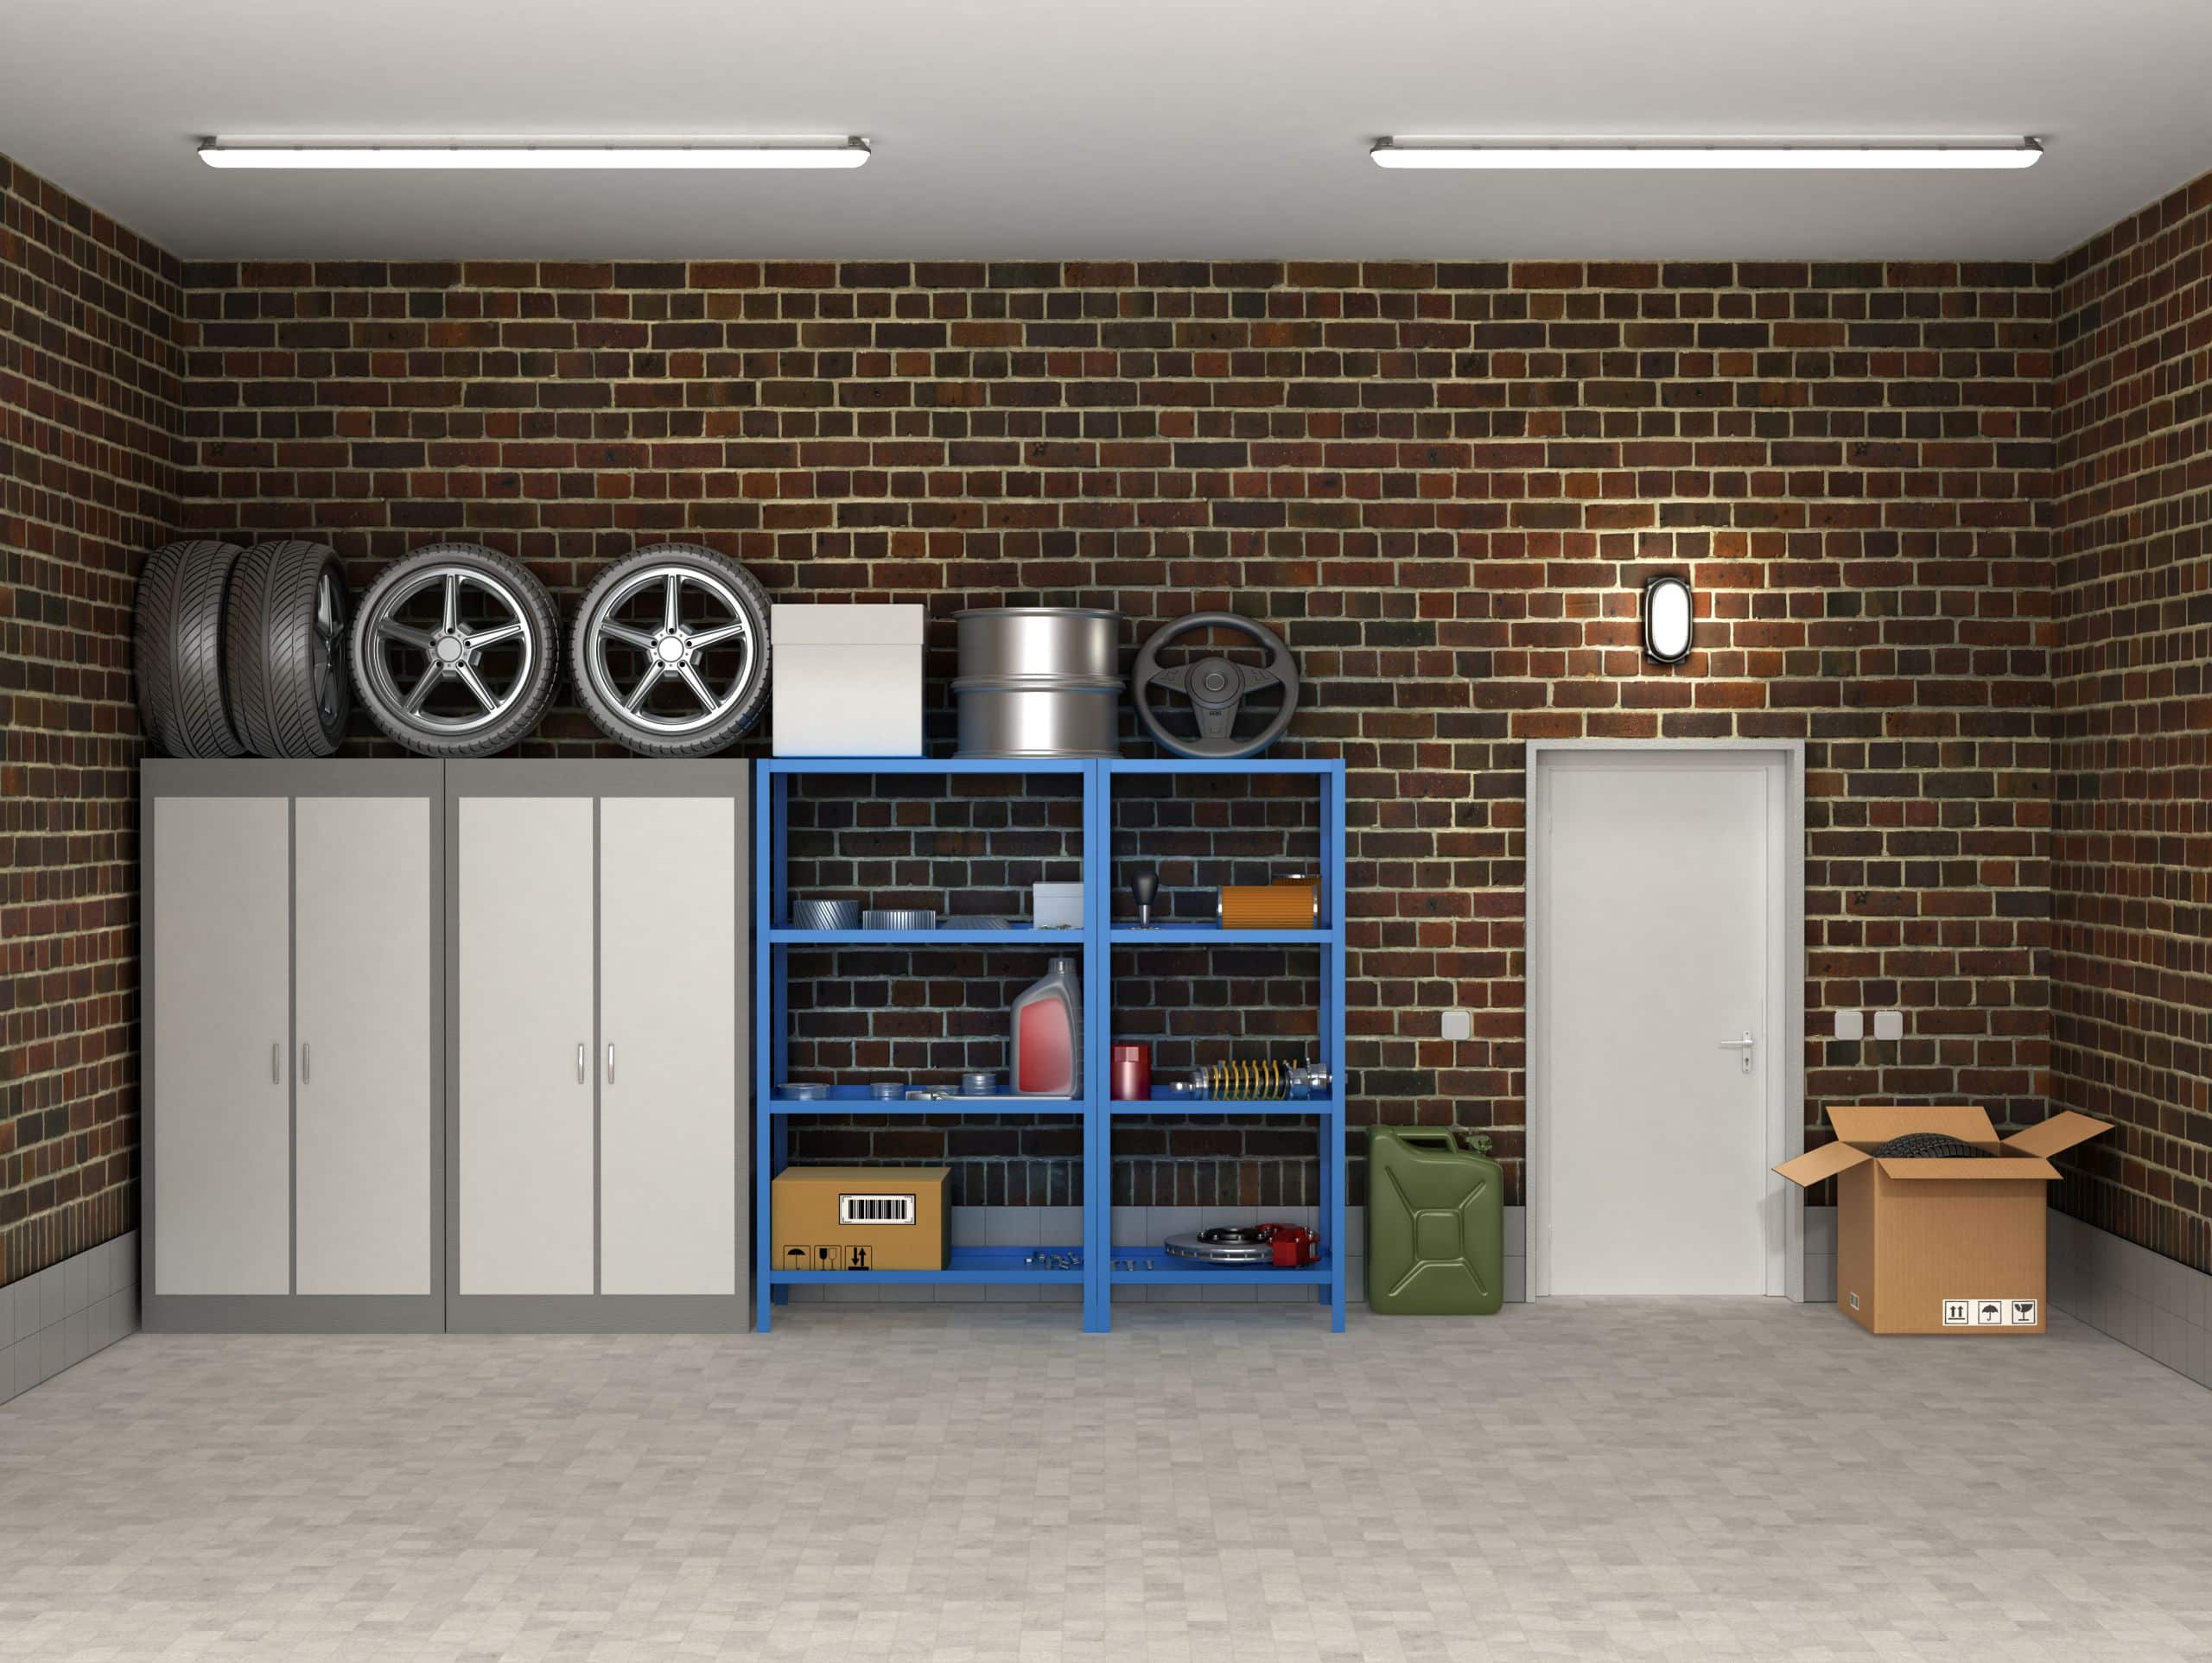 Garage Storage: 5 Tips To Organize and Maintain A Well-Neglected Space 8